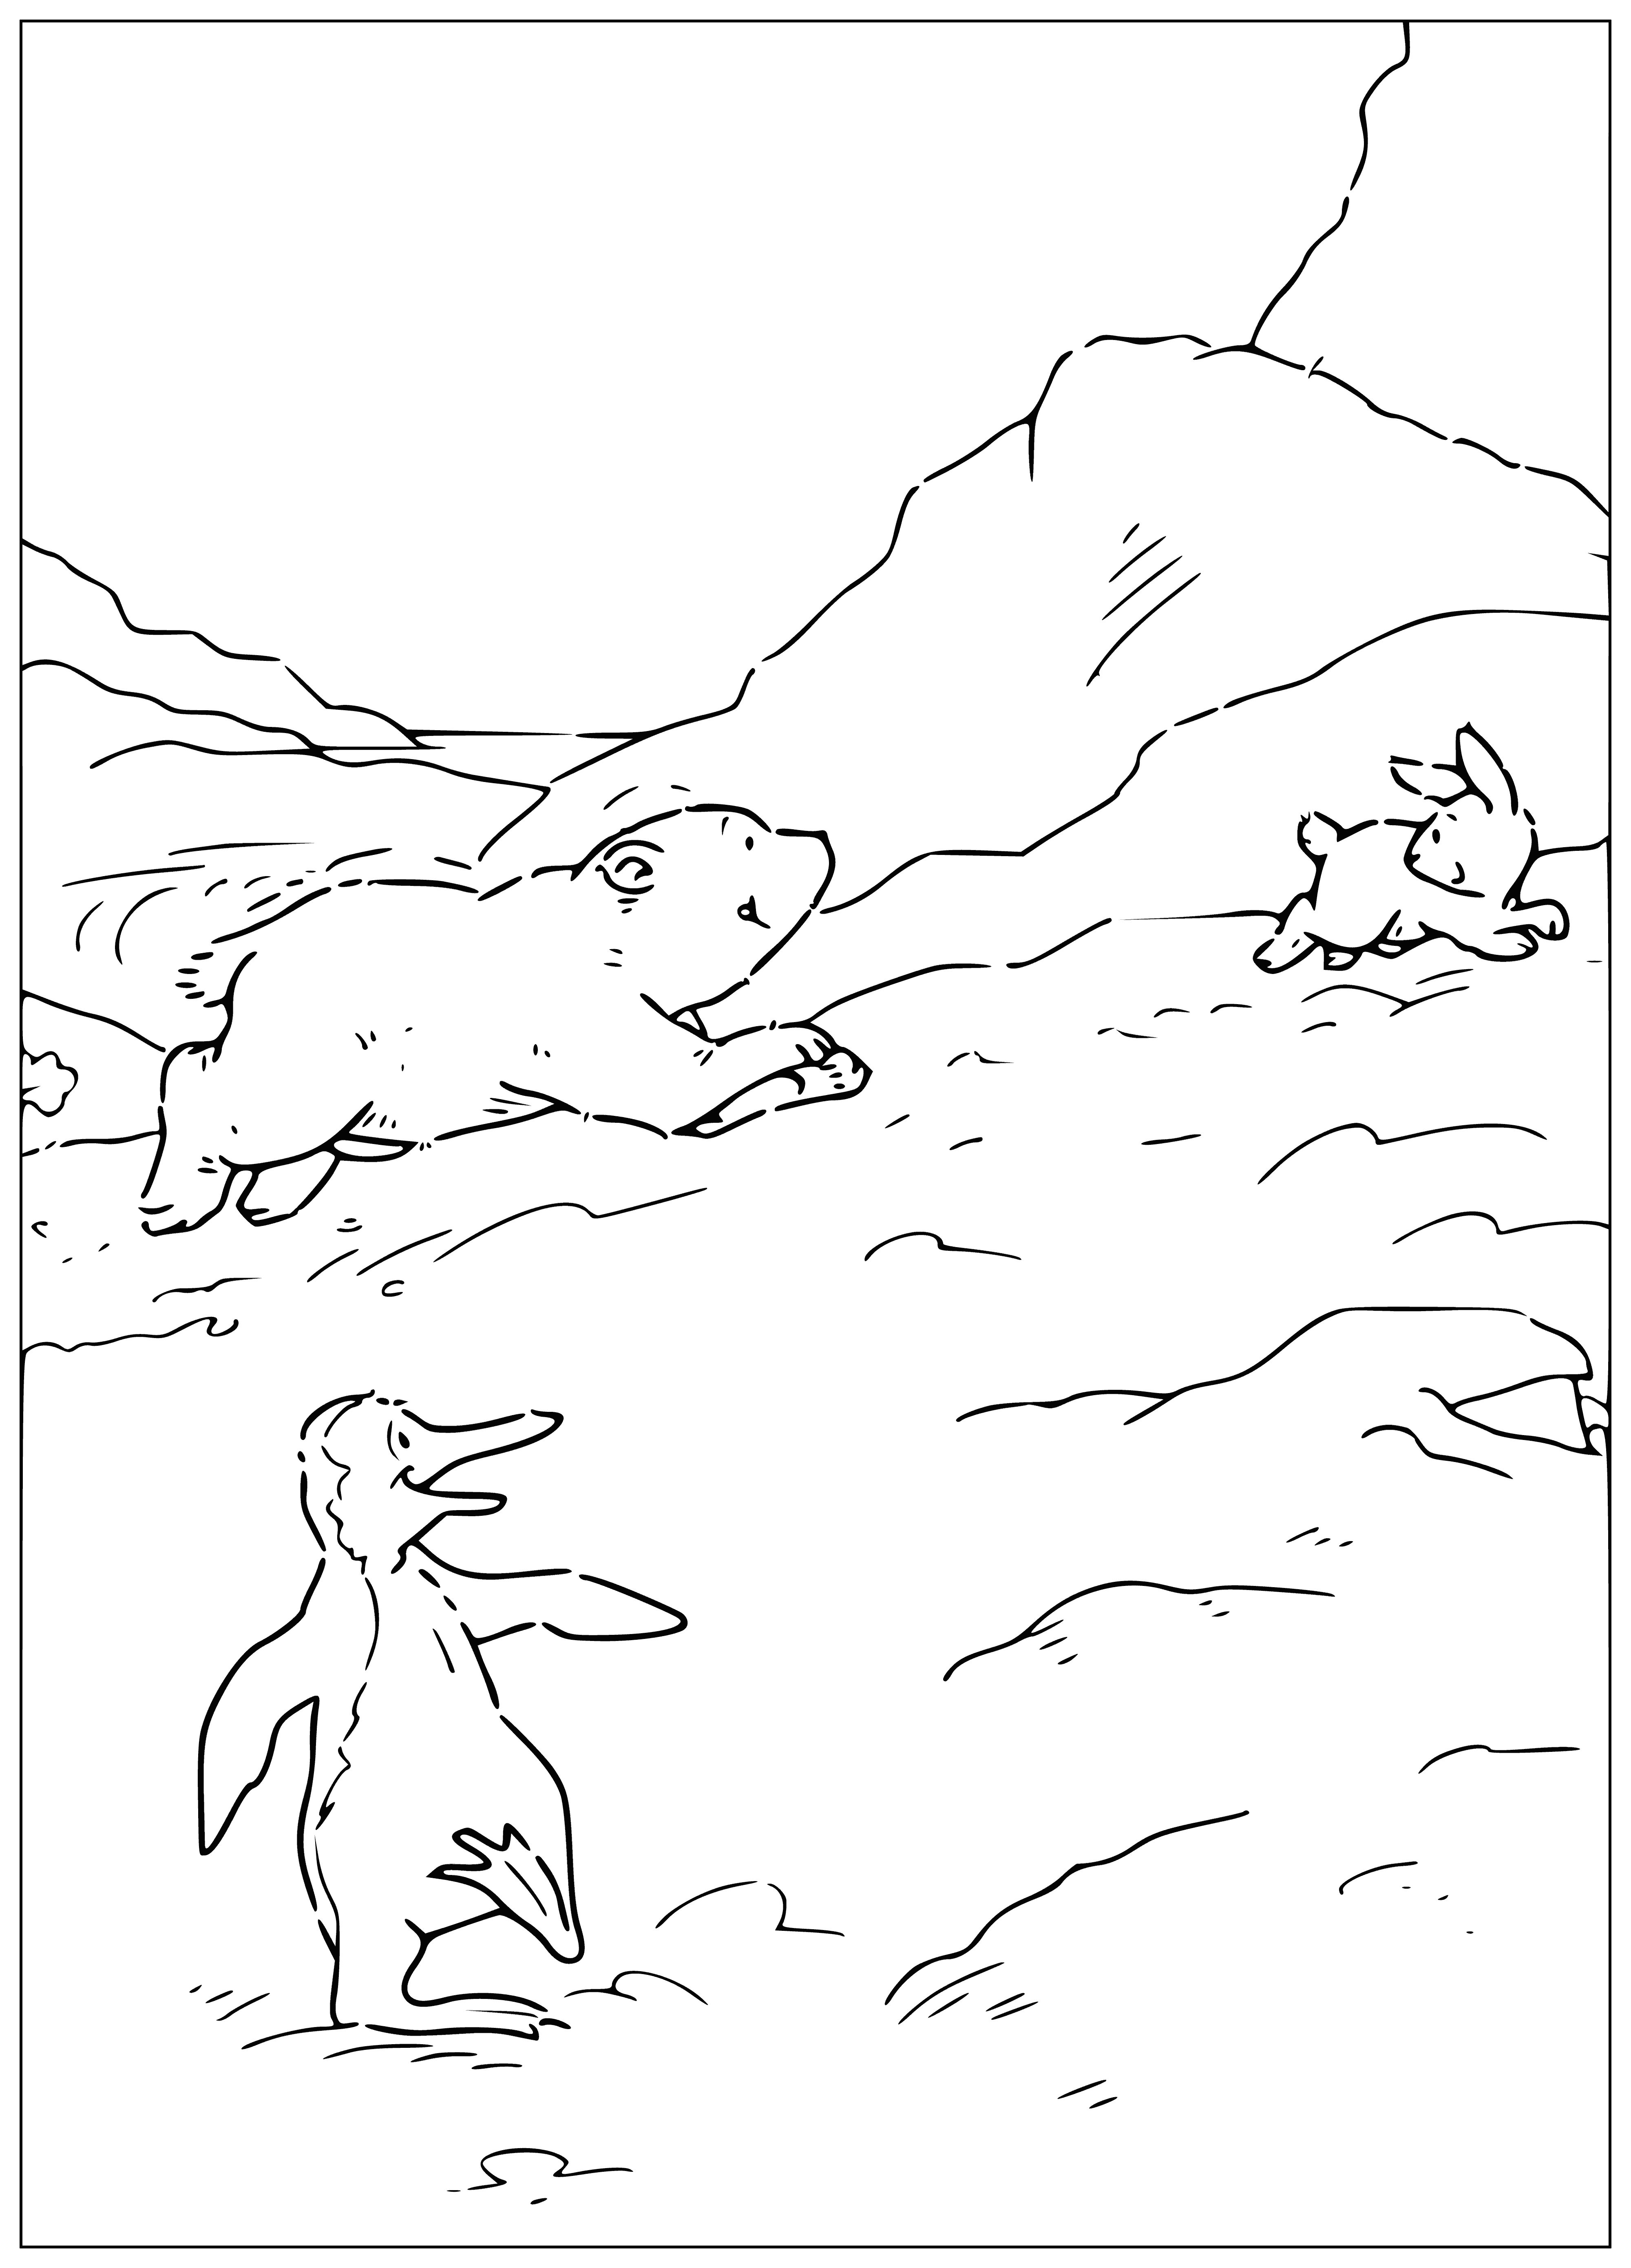 coloring page: Lars the polar bear sits on a block of ice wearing a red scarf and blue hat, cradling a white bunny with black spots holding a carrot.